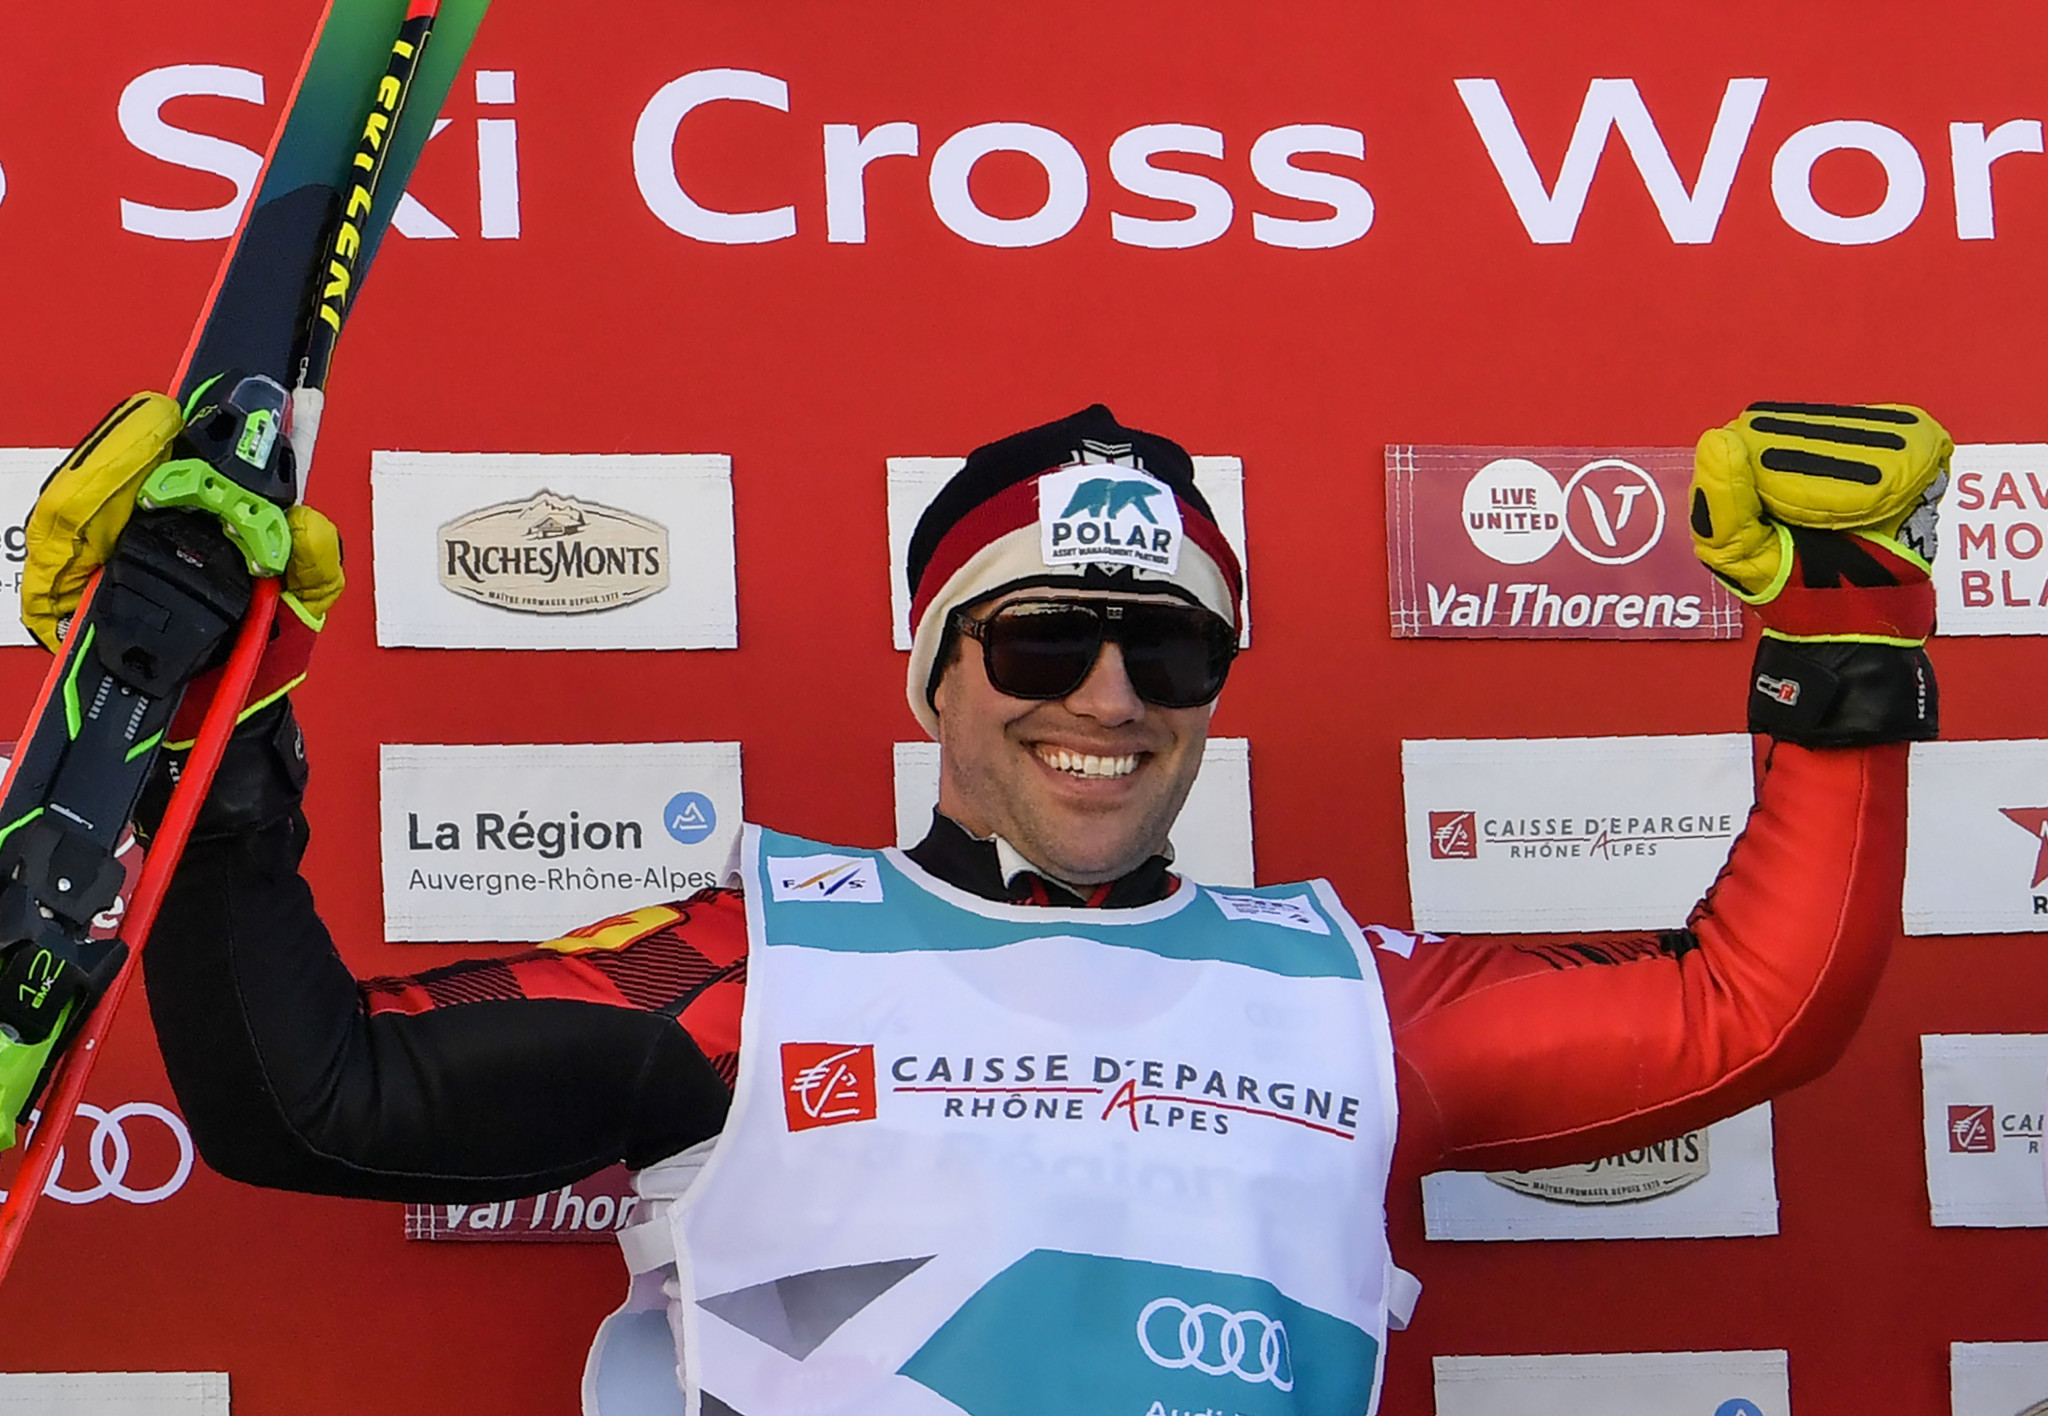 Drury tops men's qualification standings at FIS Ski Cross World Cup in Innichen